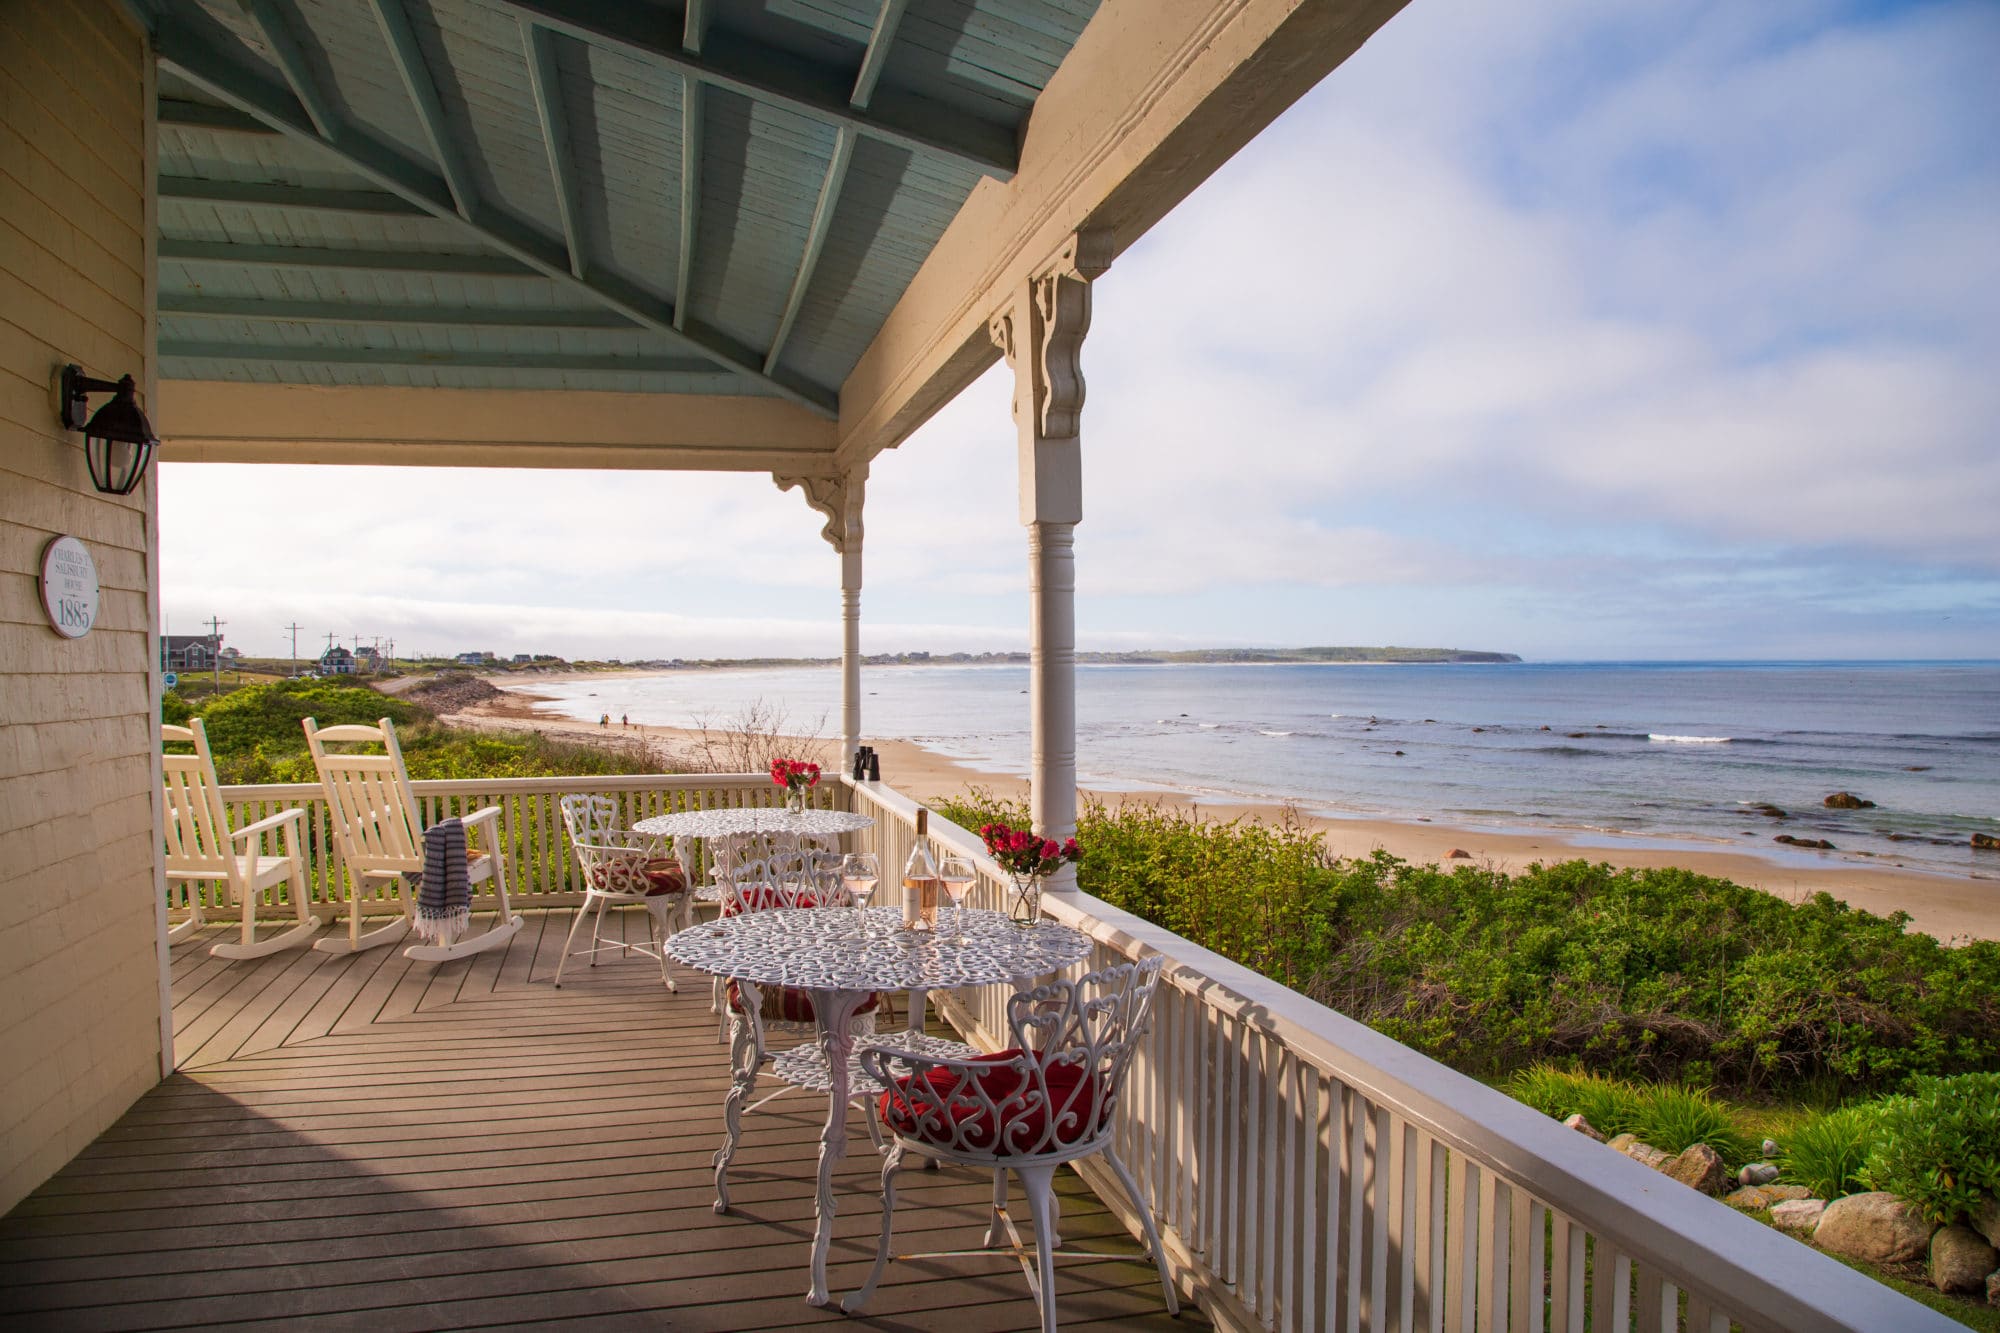 The front porch overlooking the ocean at the best lodging on Block Island